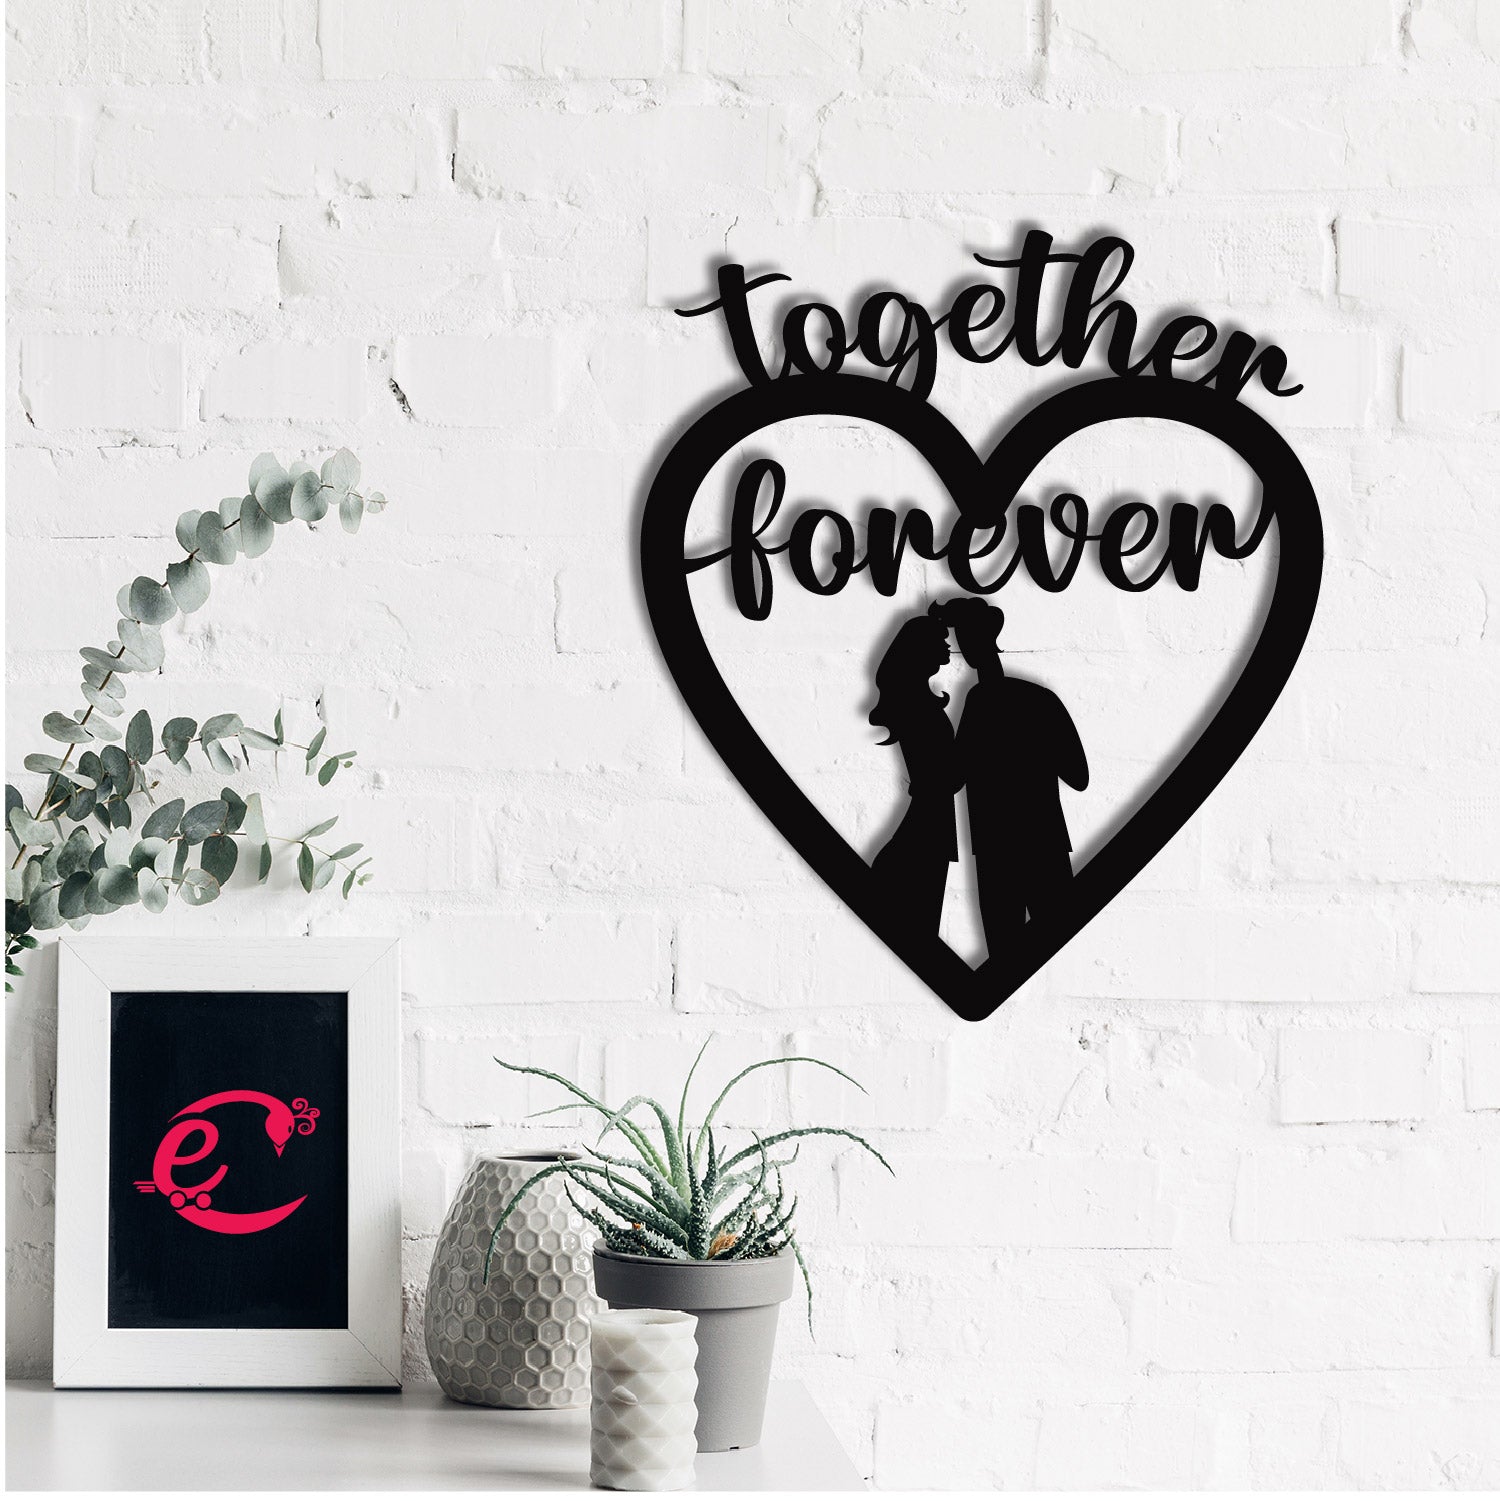 "Together Forever" Love Theme Black Engineered Wood Wall Art Cutout, Ready to Hang Home Decor